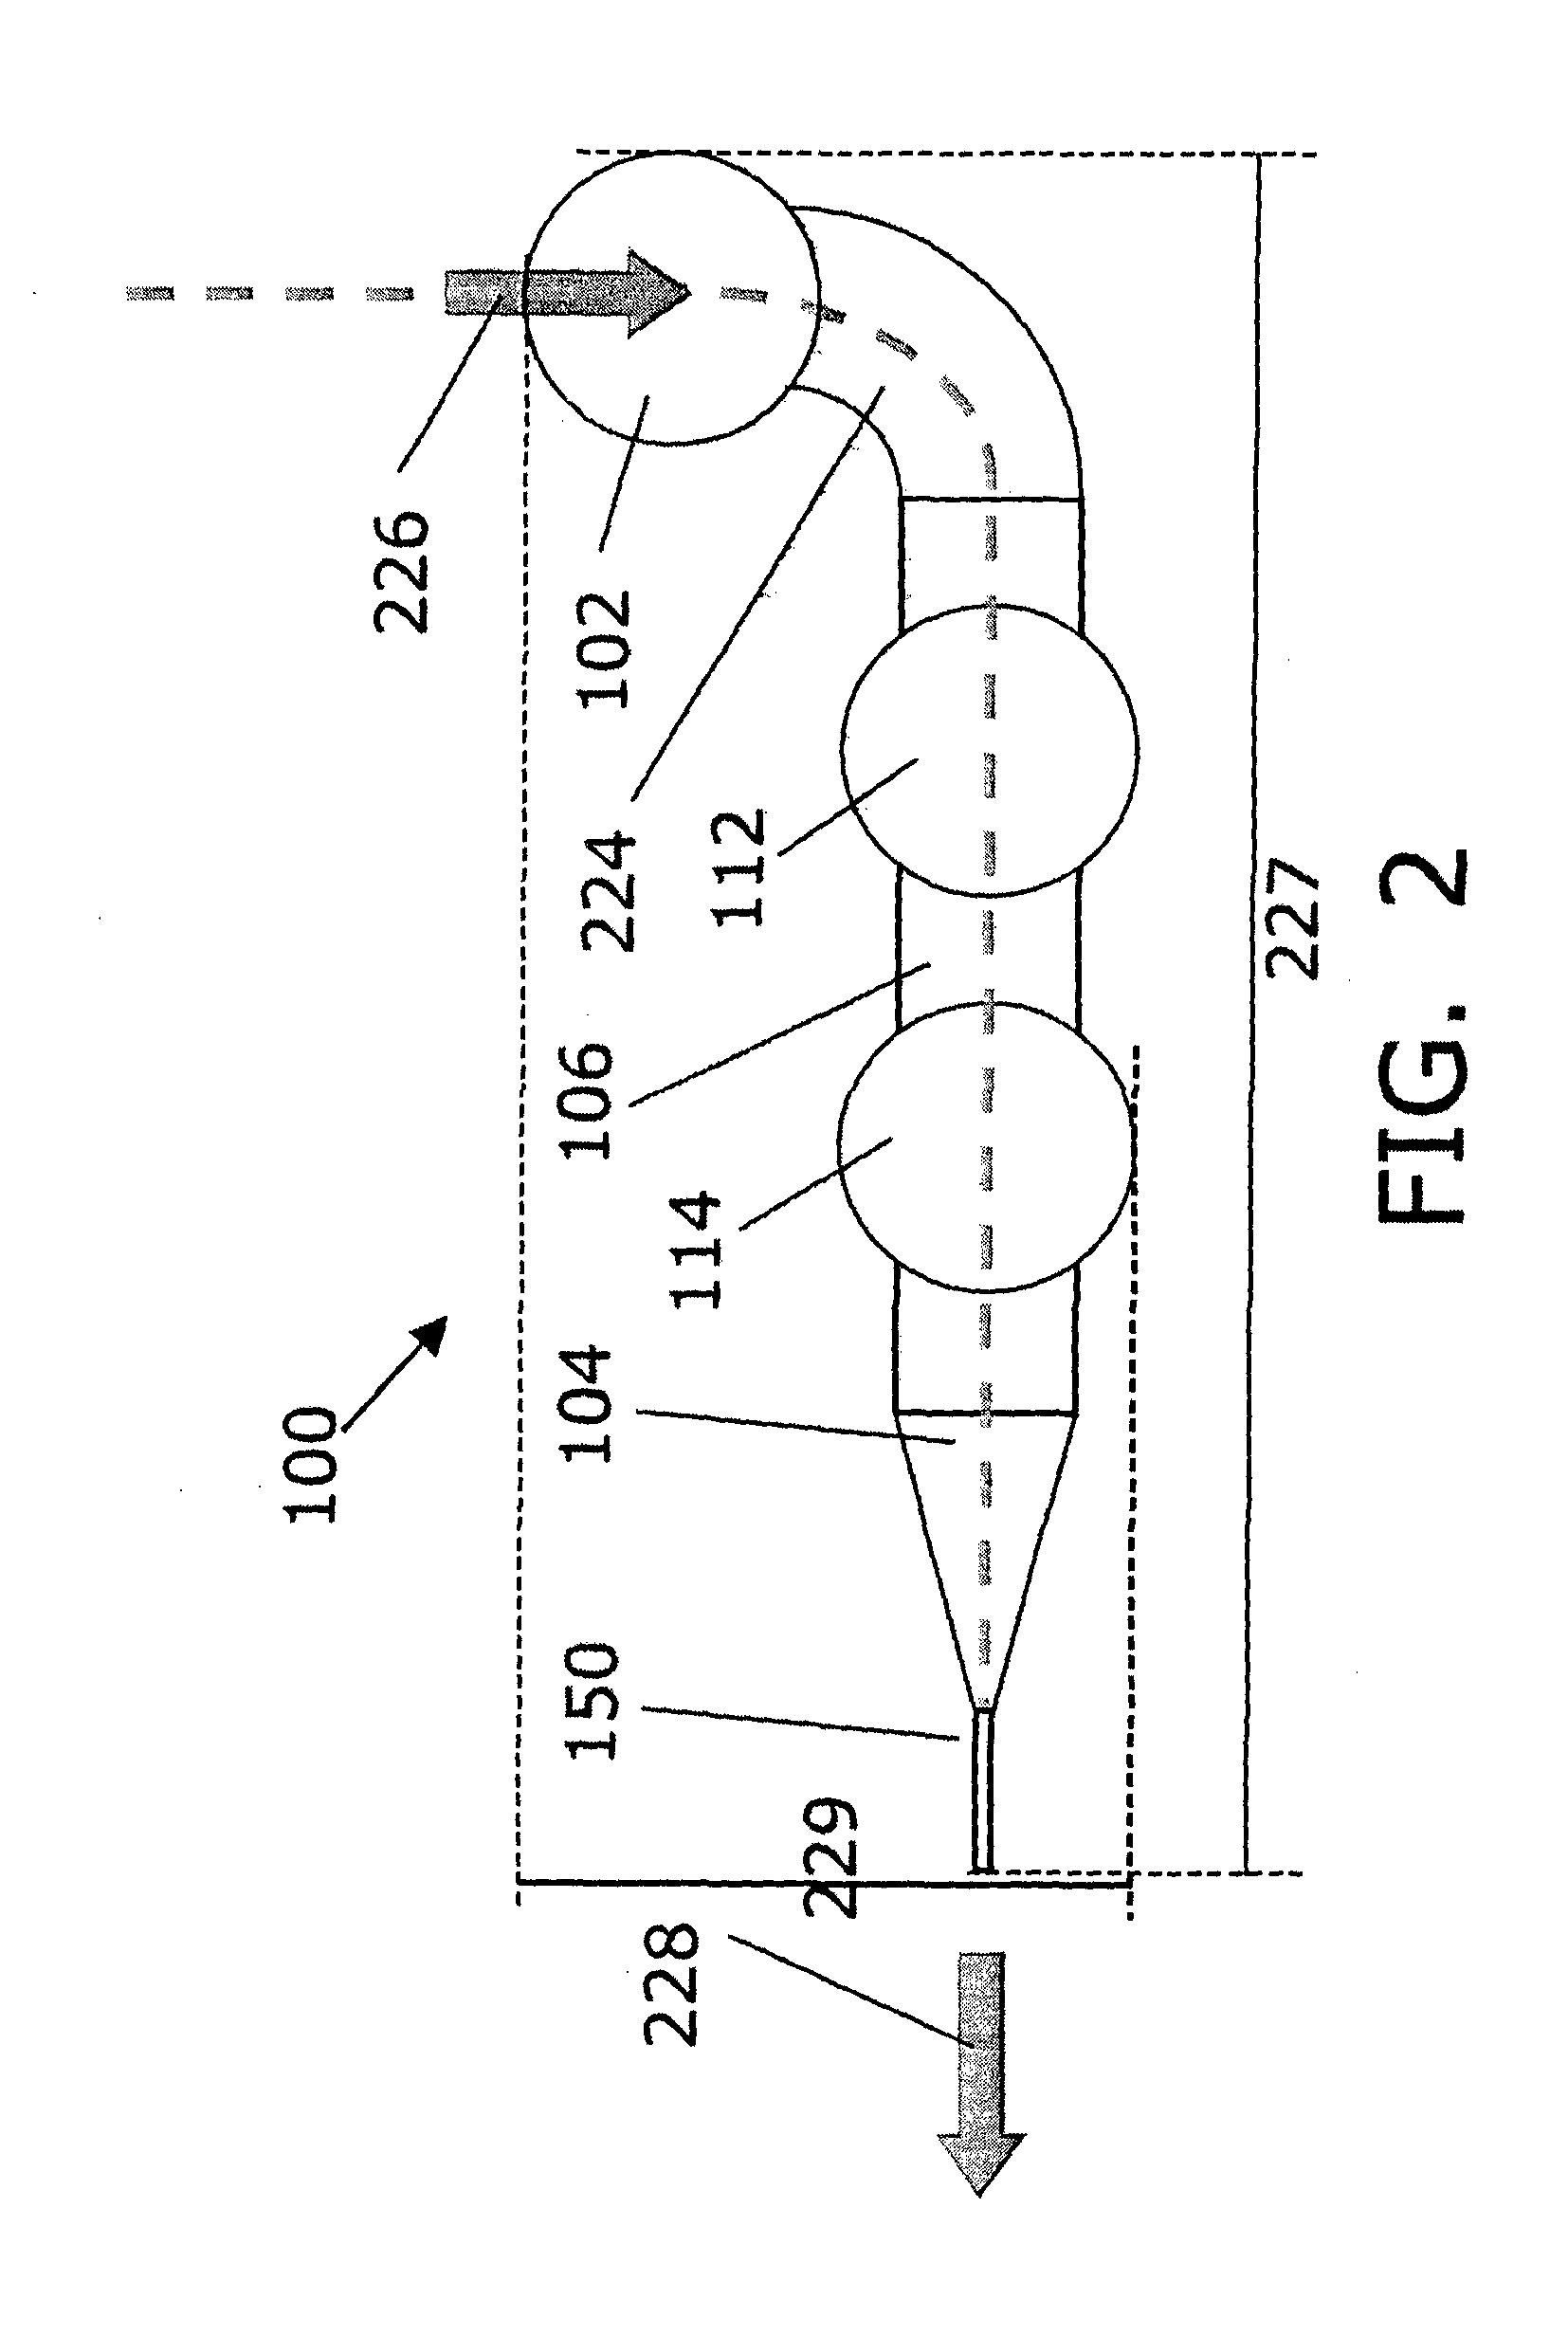 Optically guided microdevice comprising a nanowire